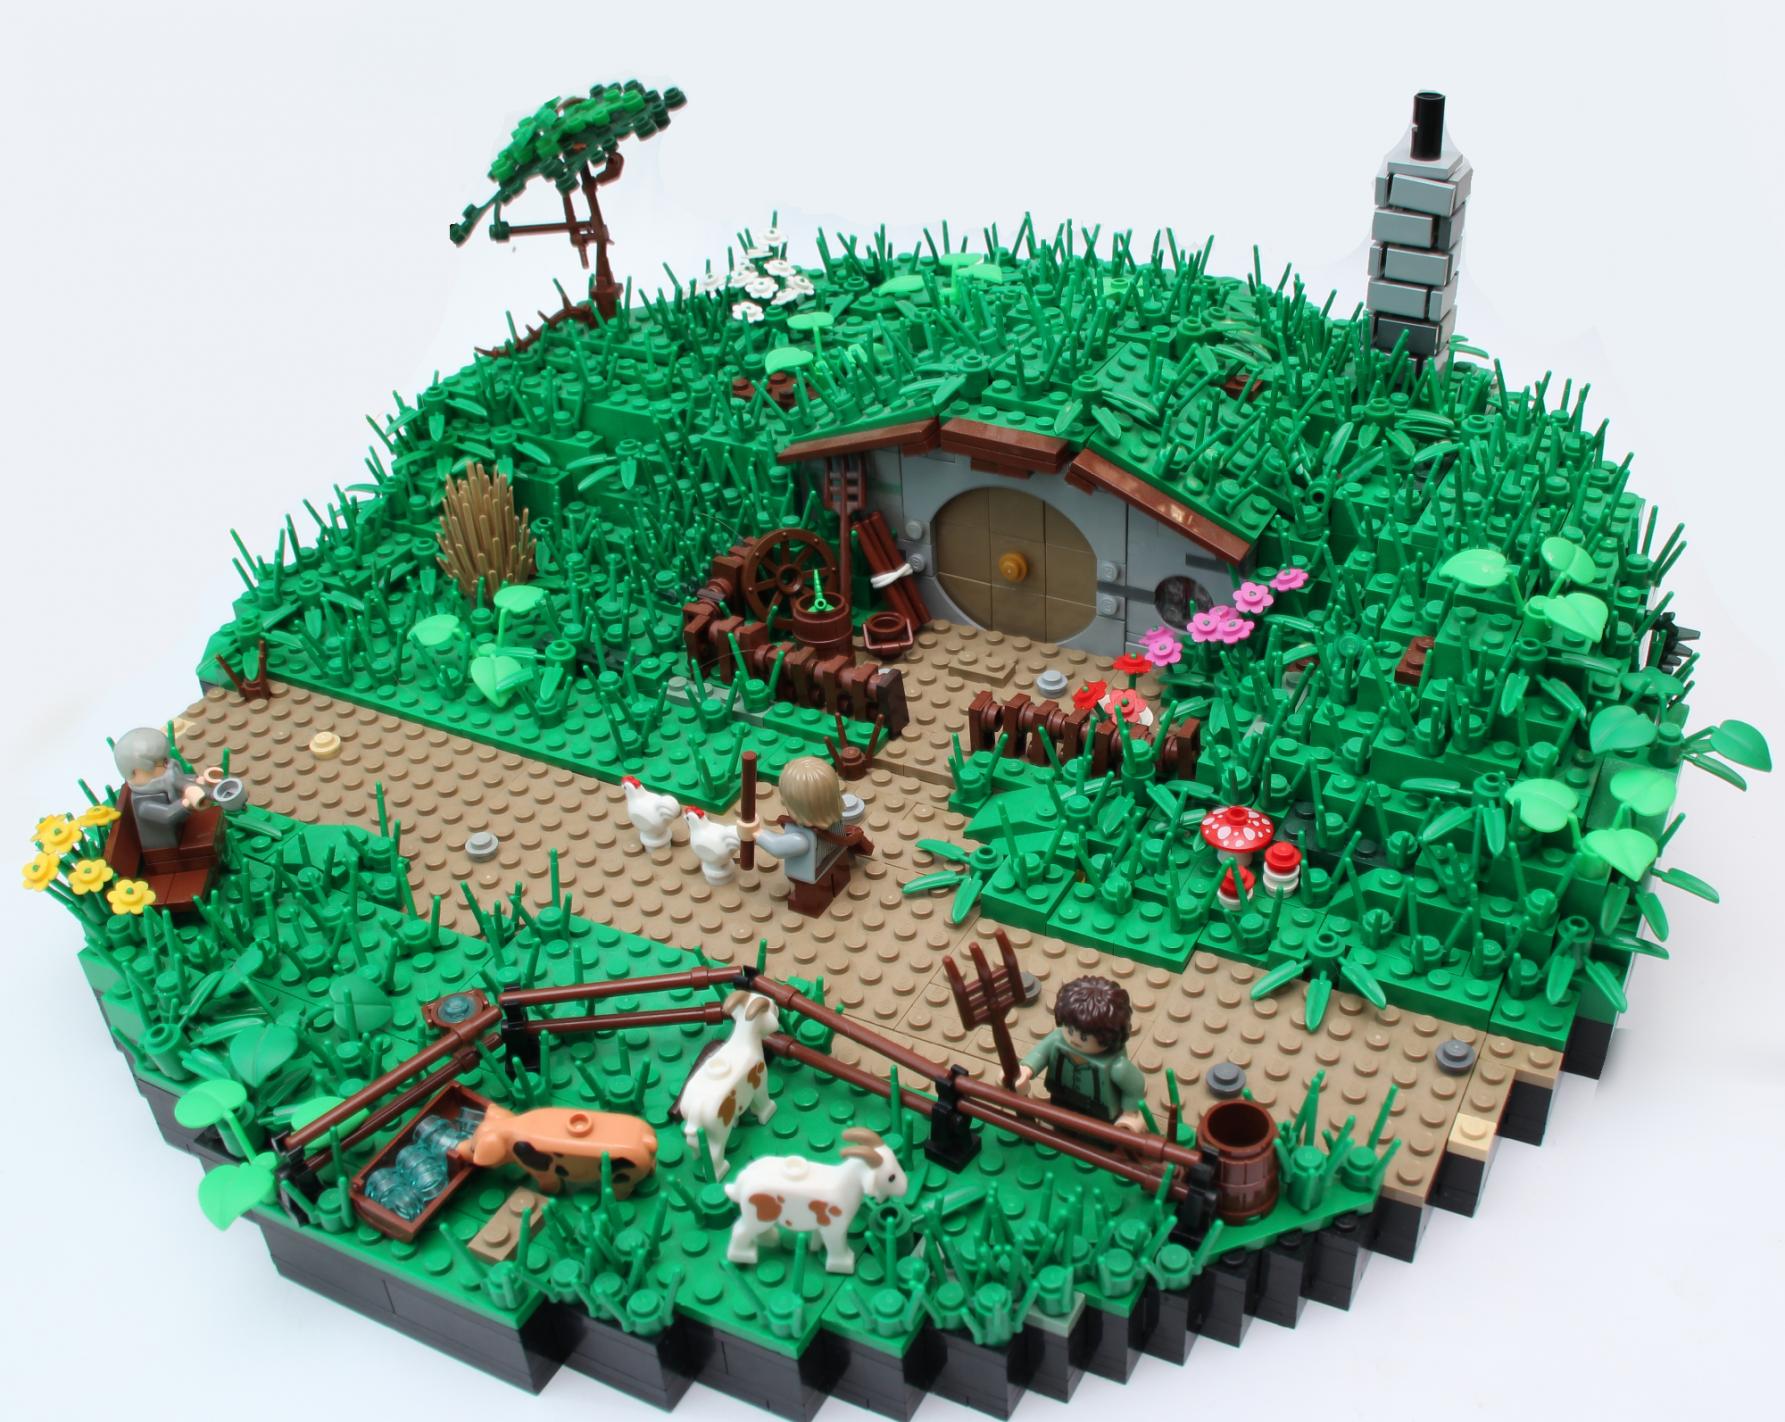 Hobbit Hole LEGO Build Goes Far Beyond The Realm Of The Block